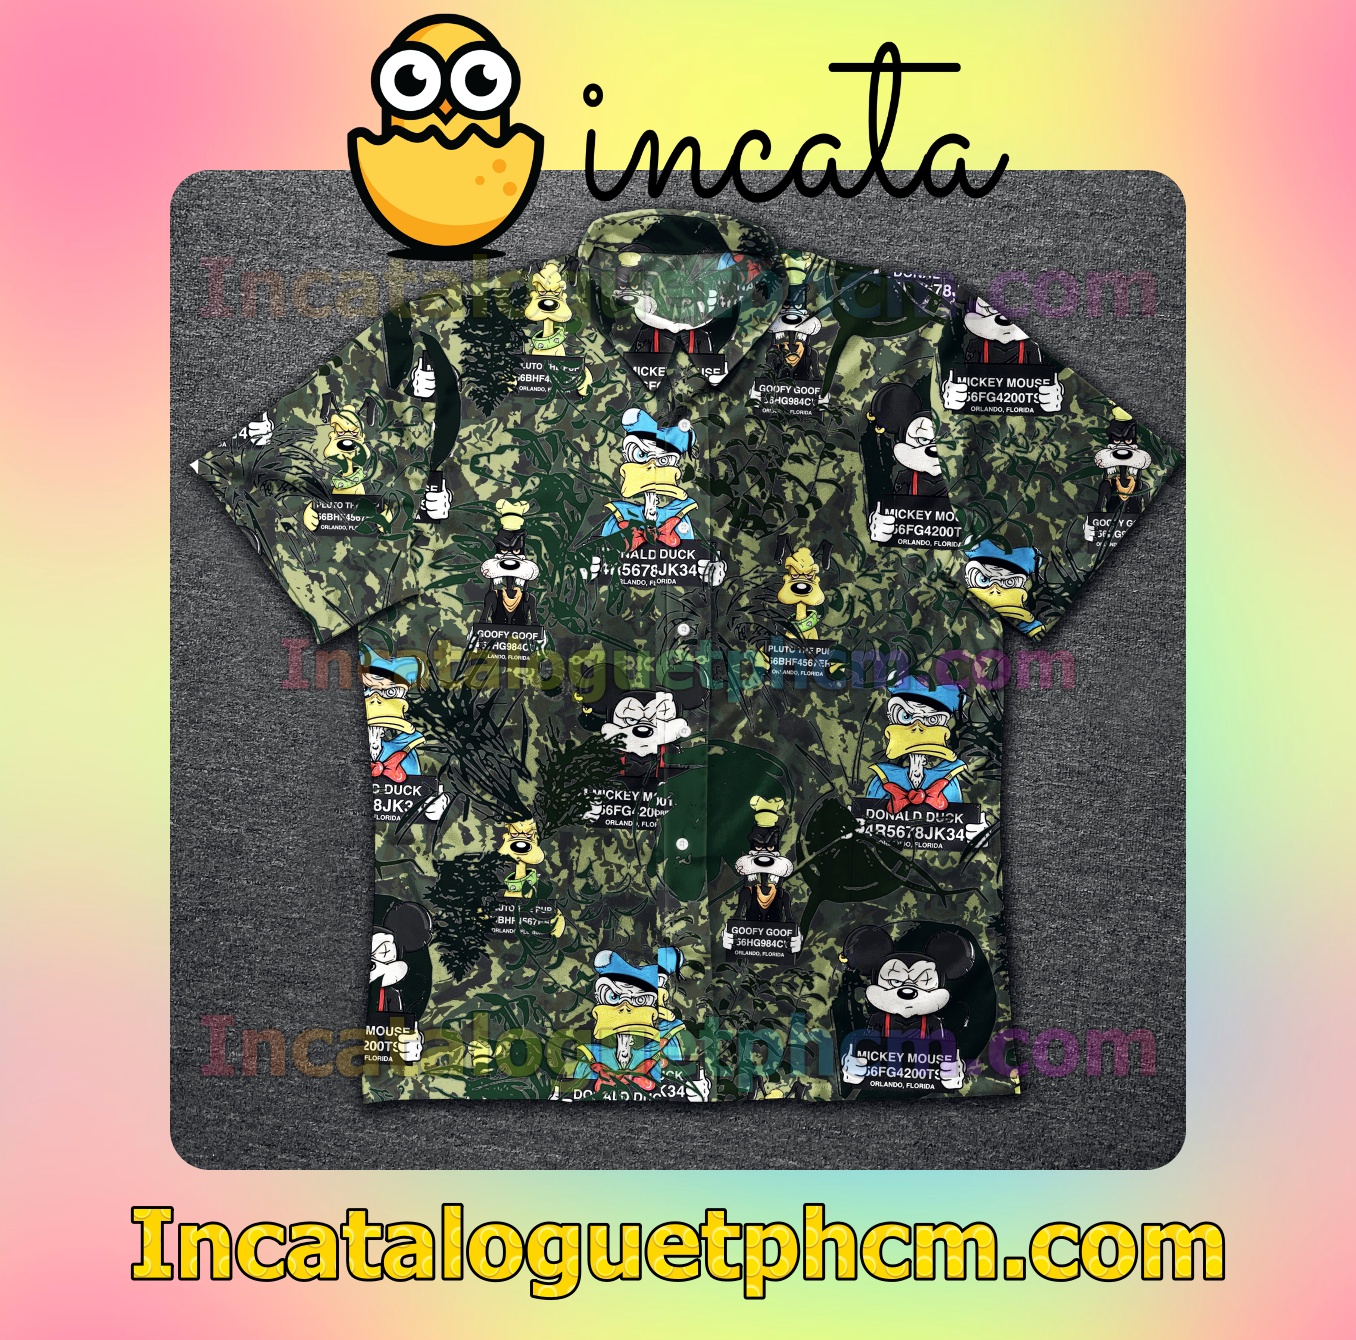 Donald Mickey And Goofy Holding Number Plate Camo Mens Short Sleeve Shirts